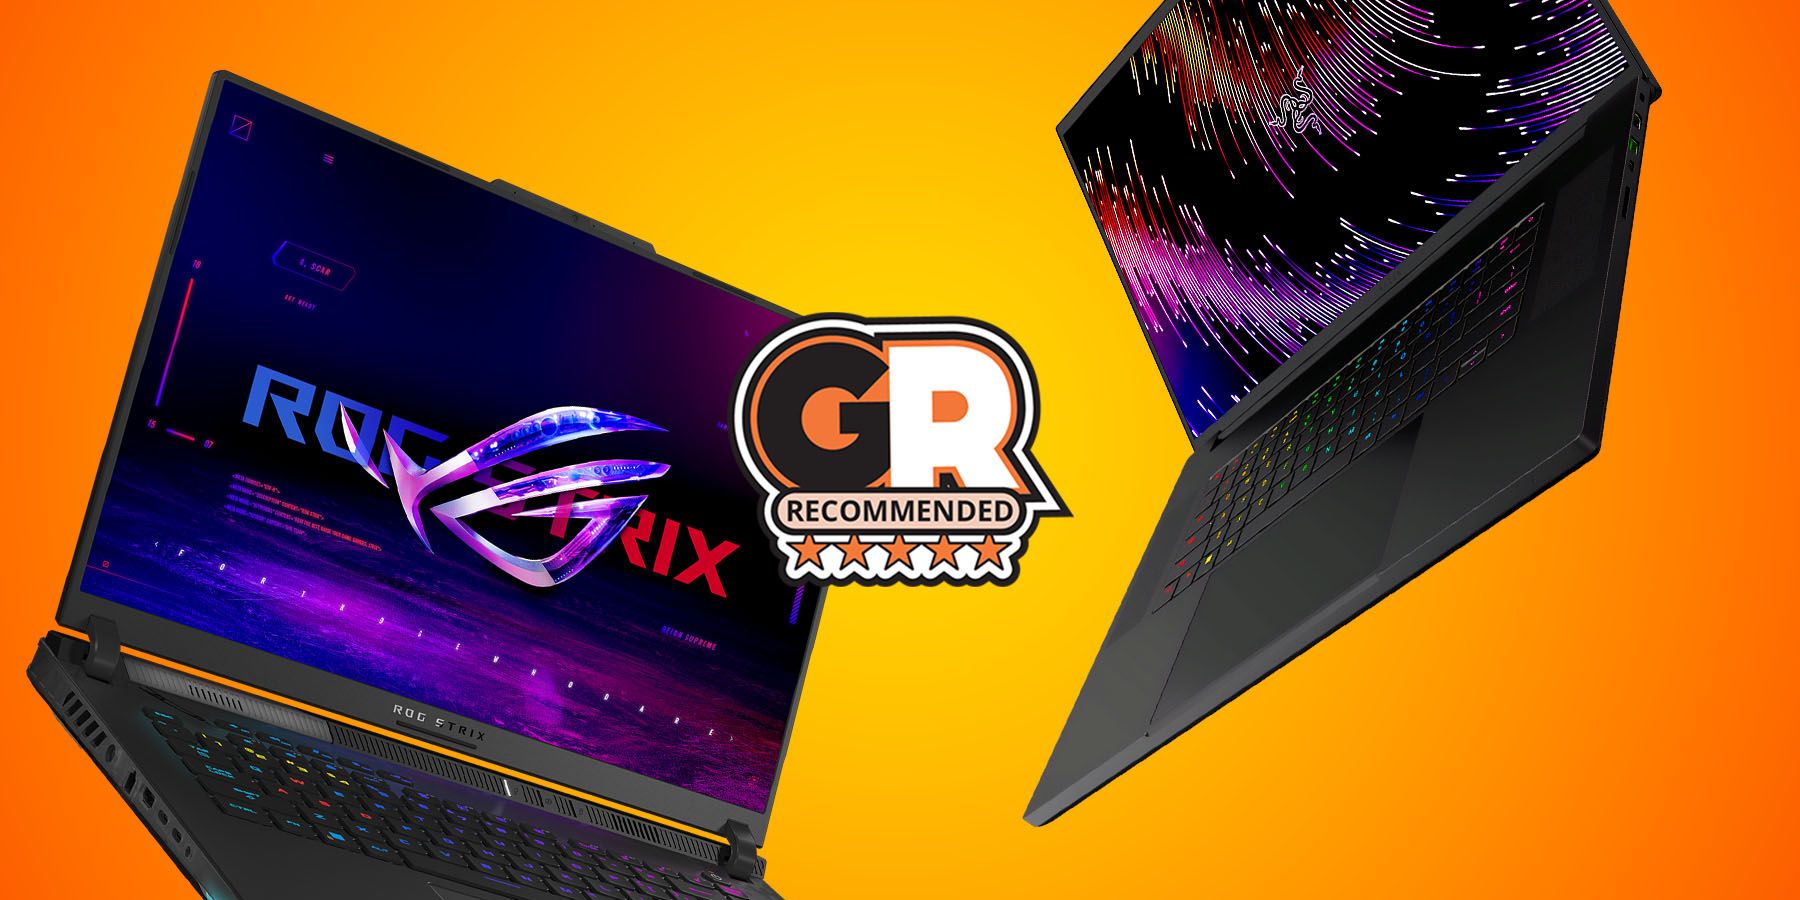 The Best Premium Laptops for Gaming in 2023